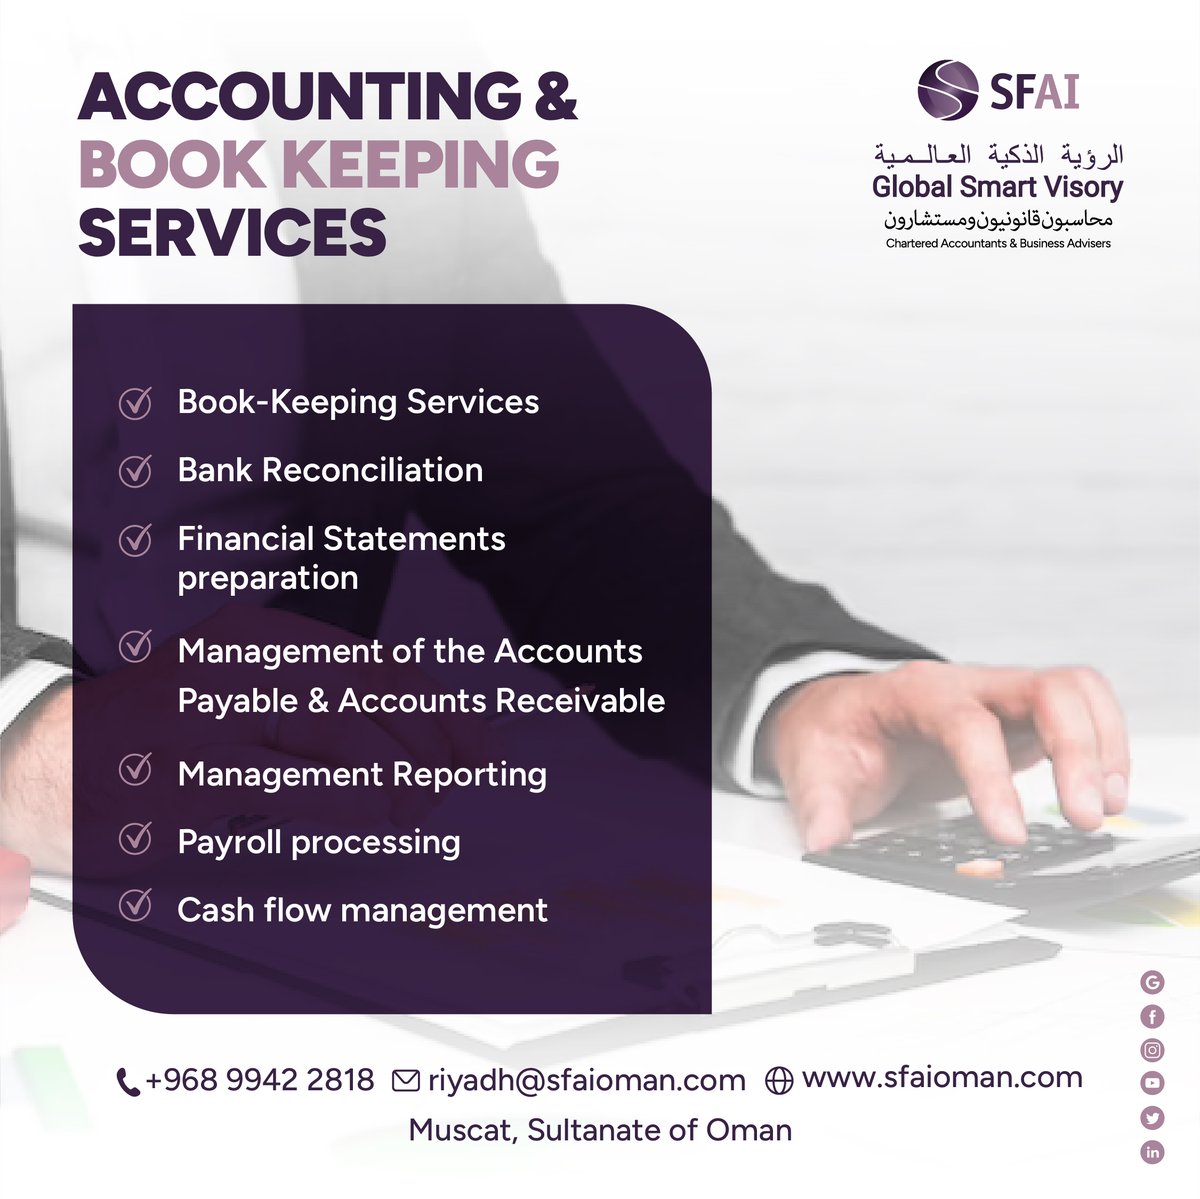 Are you looking for expert accounting services? Look no further! Our team of skilled accountants is here to help you navigate the financial landscape with ease. Contact us today to schedule a consultation and take your business to new heights! 

#Accounting_Services